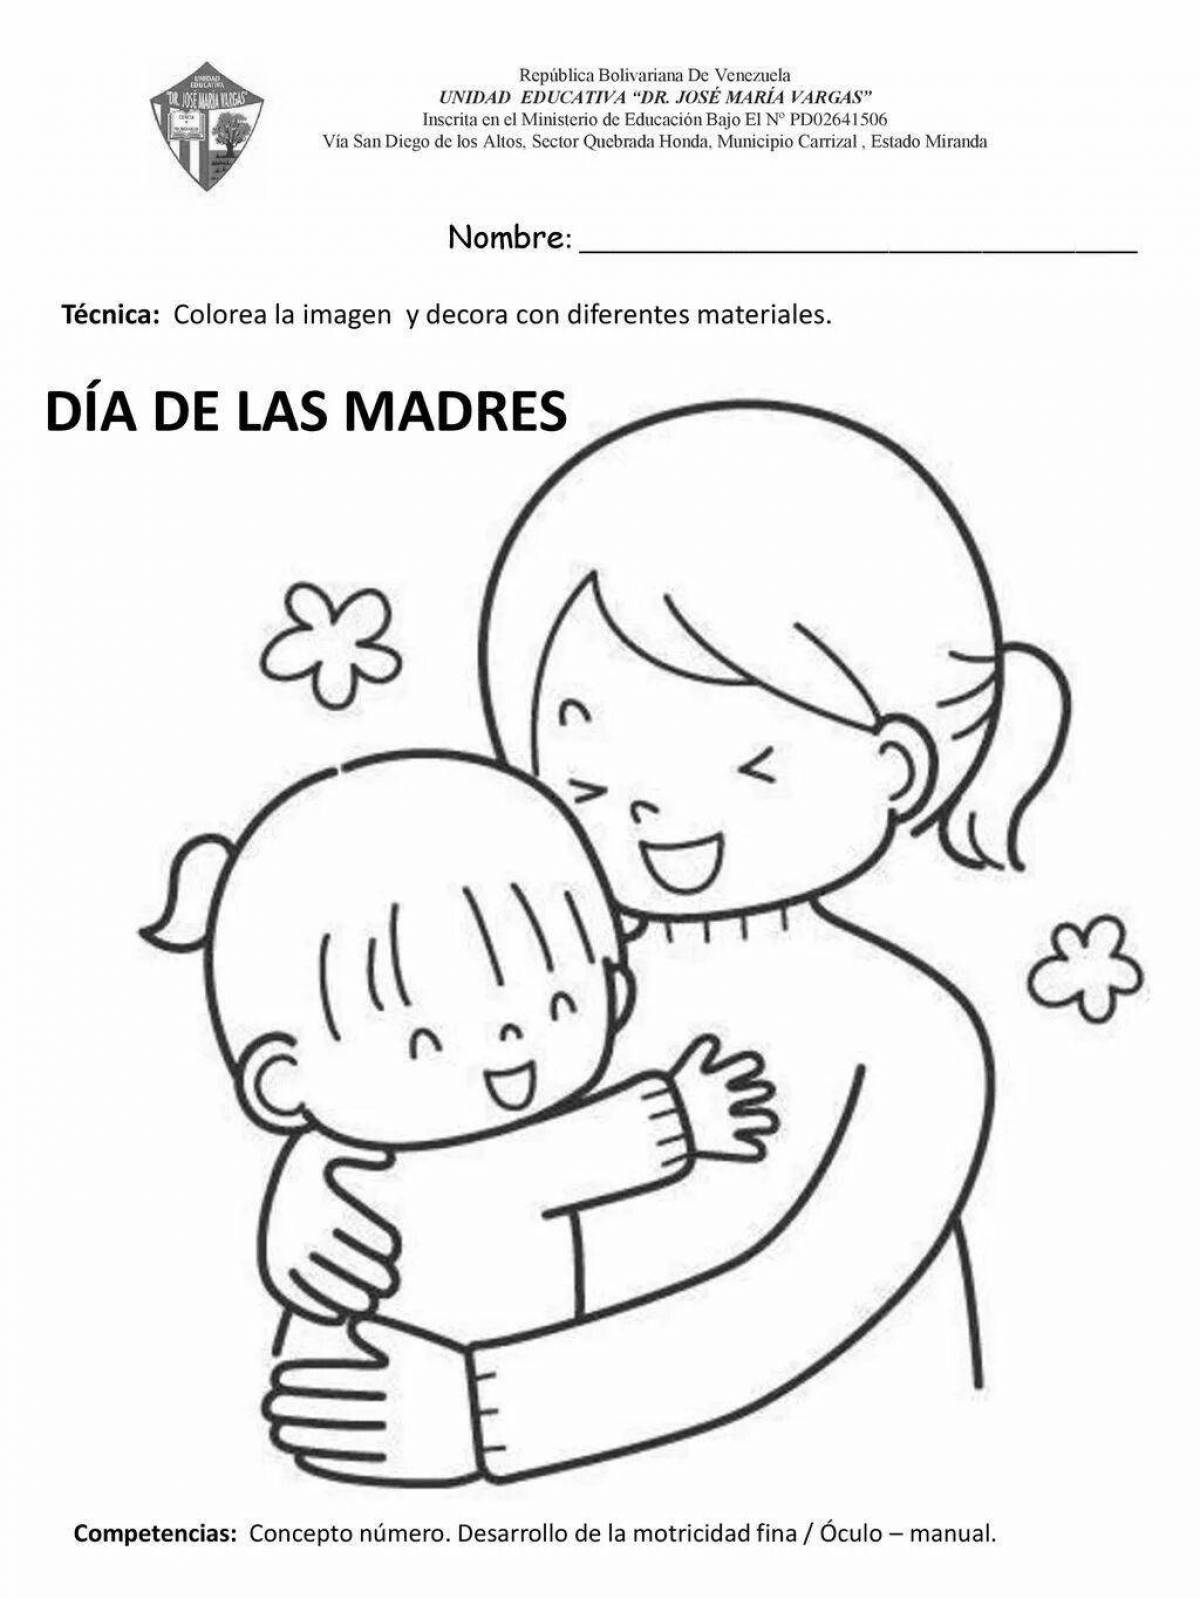 A wonderful hug day coloring book for kids